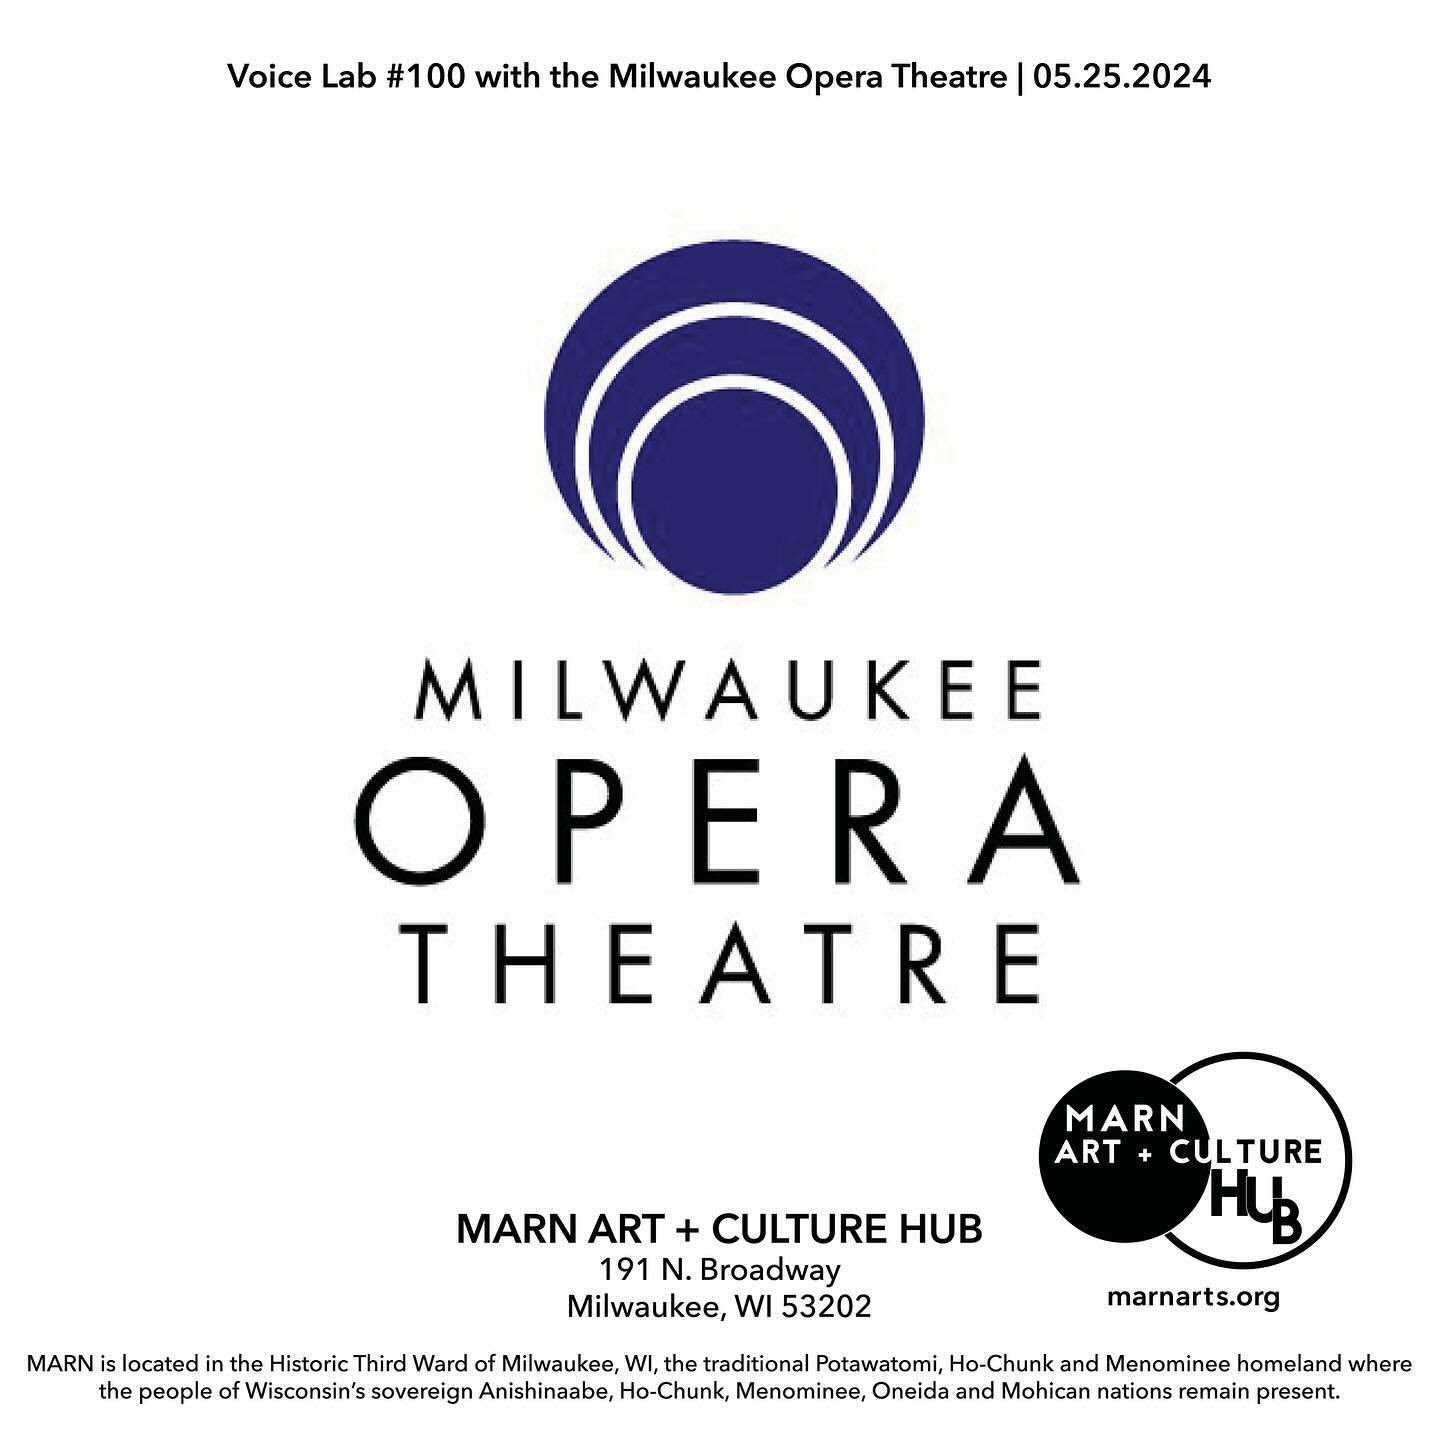 MARN and the Milwaukee Opera Theatre are pleased to host a fundraising event for the, &ldquo;100th Voice Lab&rdquo;, on Saturday, May 25th from 6 - 8pm at the MARN ART + CULTURE HUB. 🚪Doors open at 5pm.

MARN bio for details!